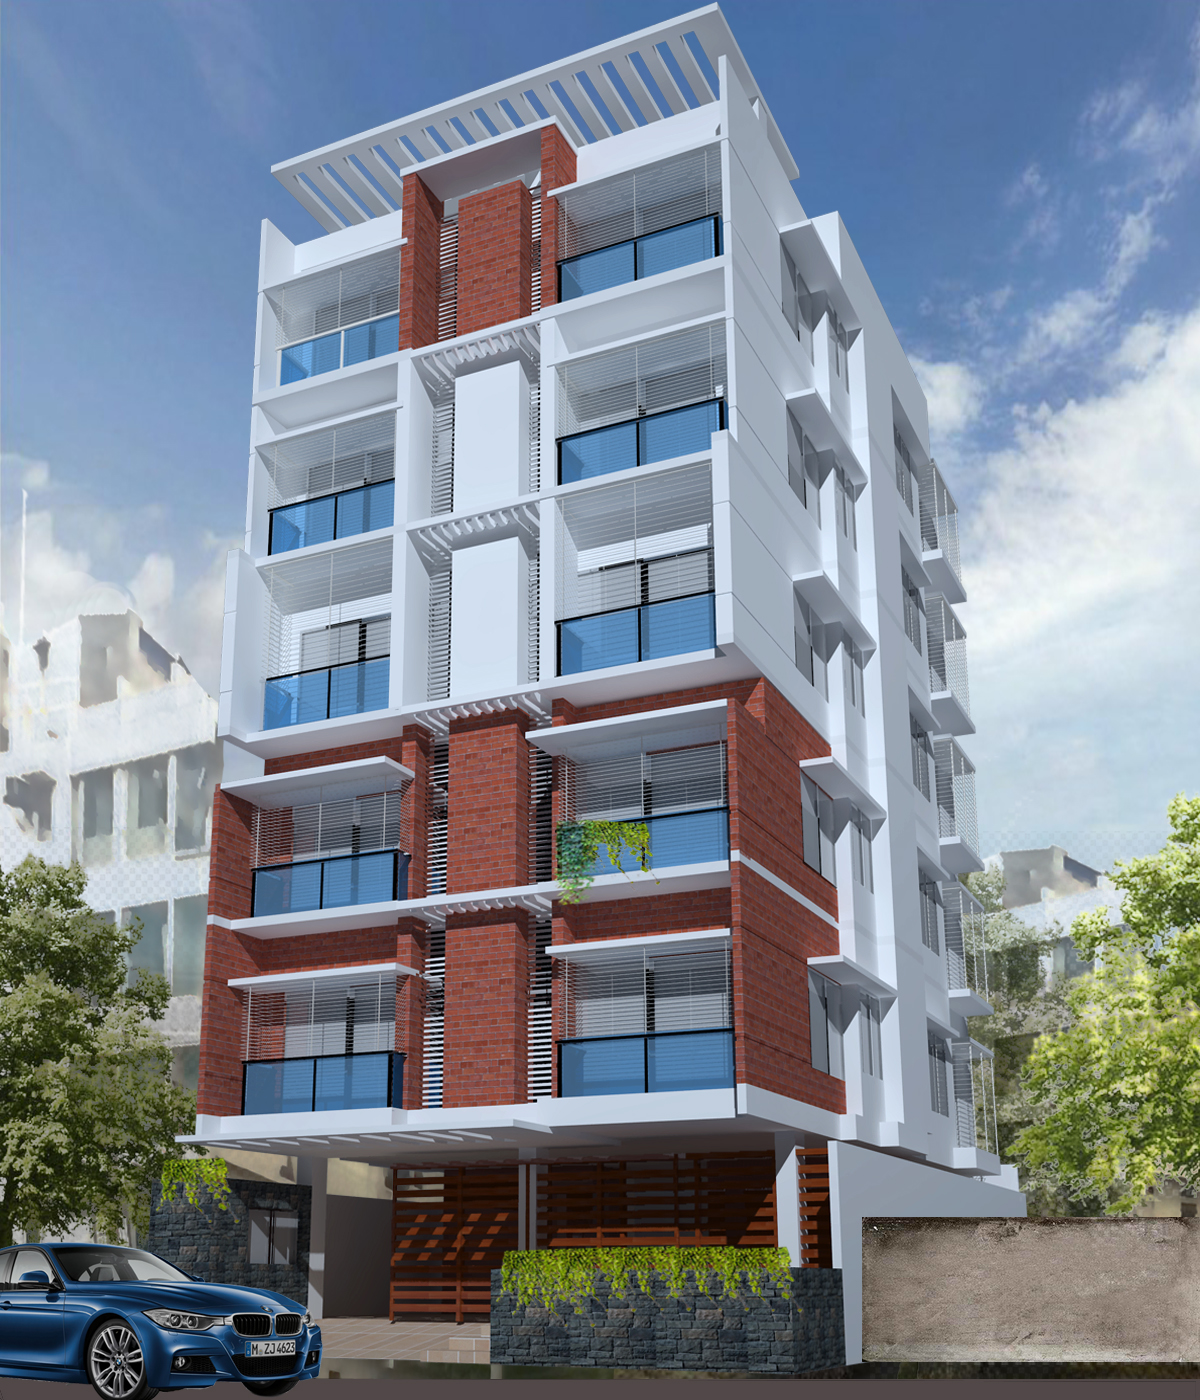 Structural Design of 6 Storied Residential Building